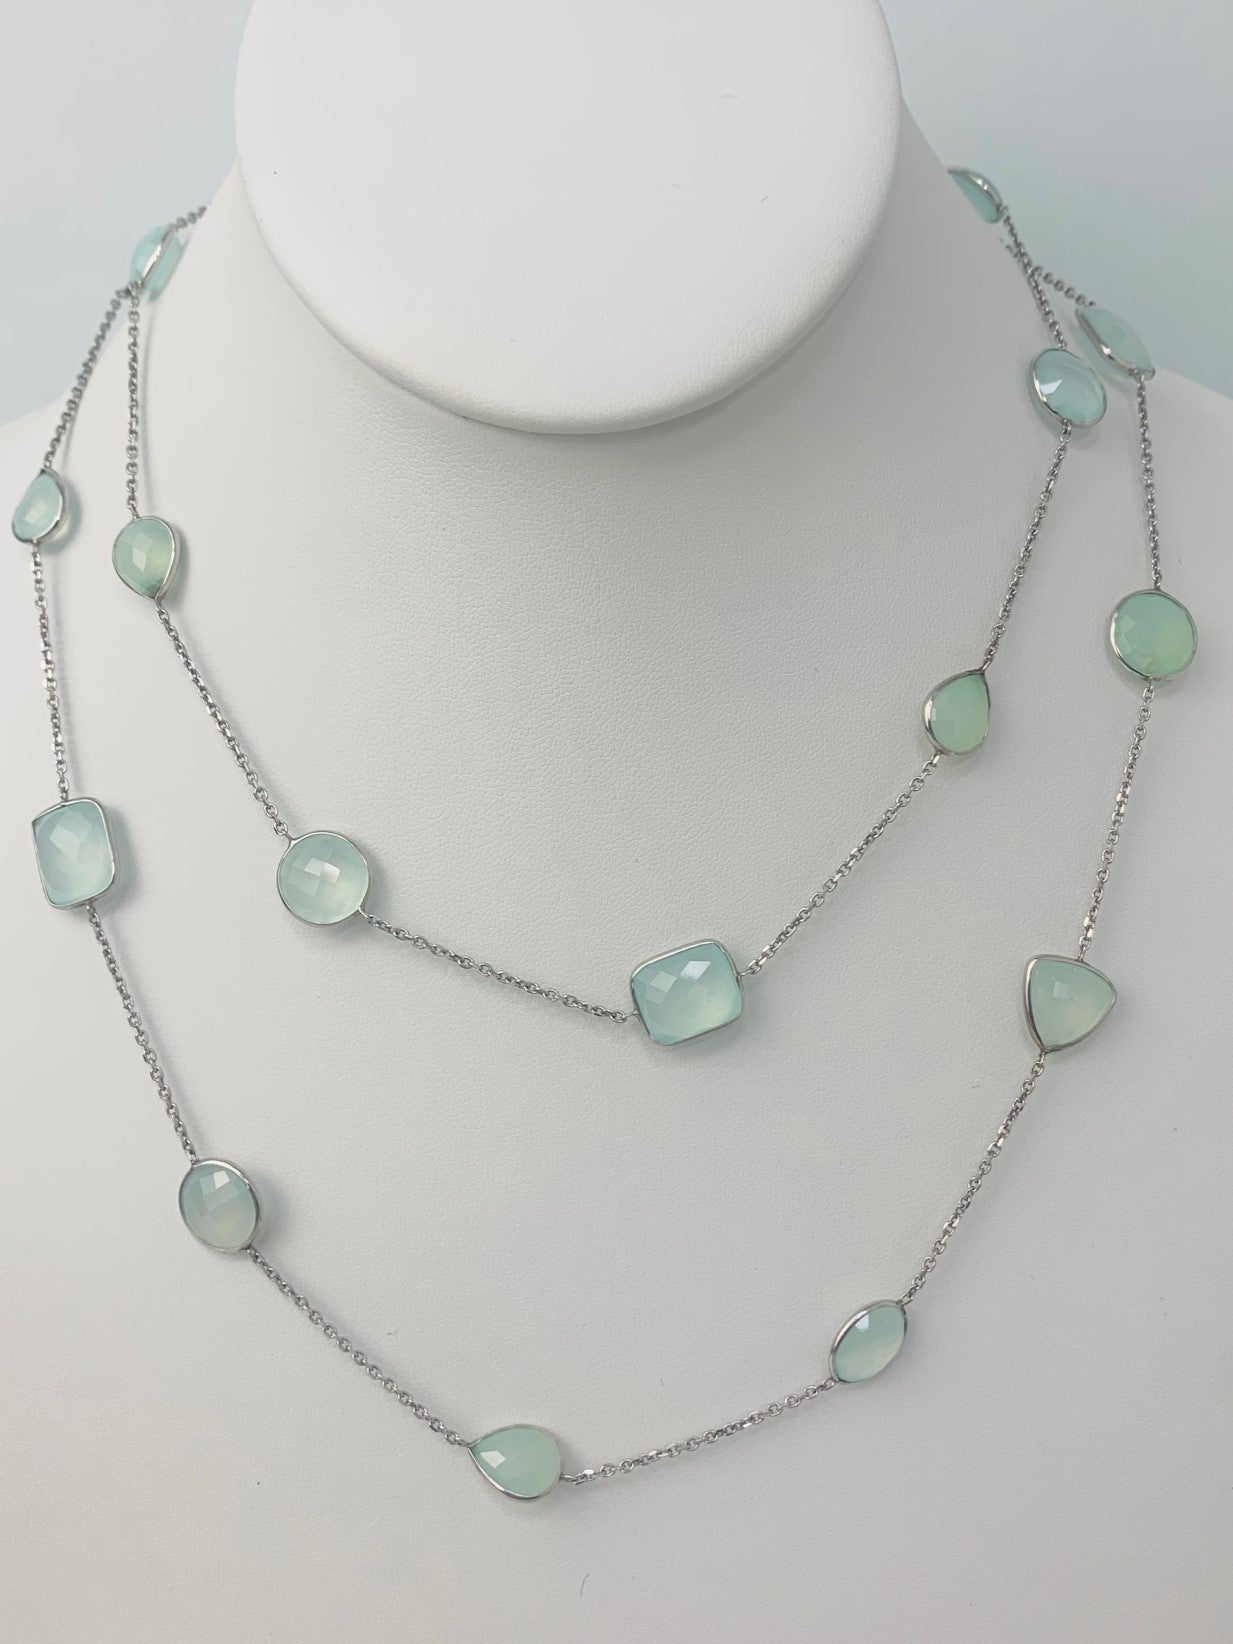 36" 20 Station Chalcedony Round, Pear, Trilliant, Oval and Rectangular Checkerboard Bezel Necklace in 14KW - NCK-172-BZGM14W-CAL-36